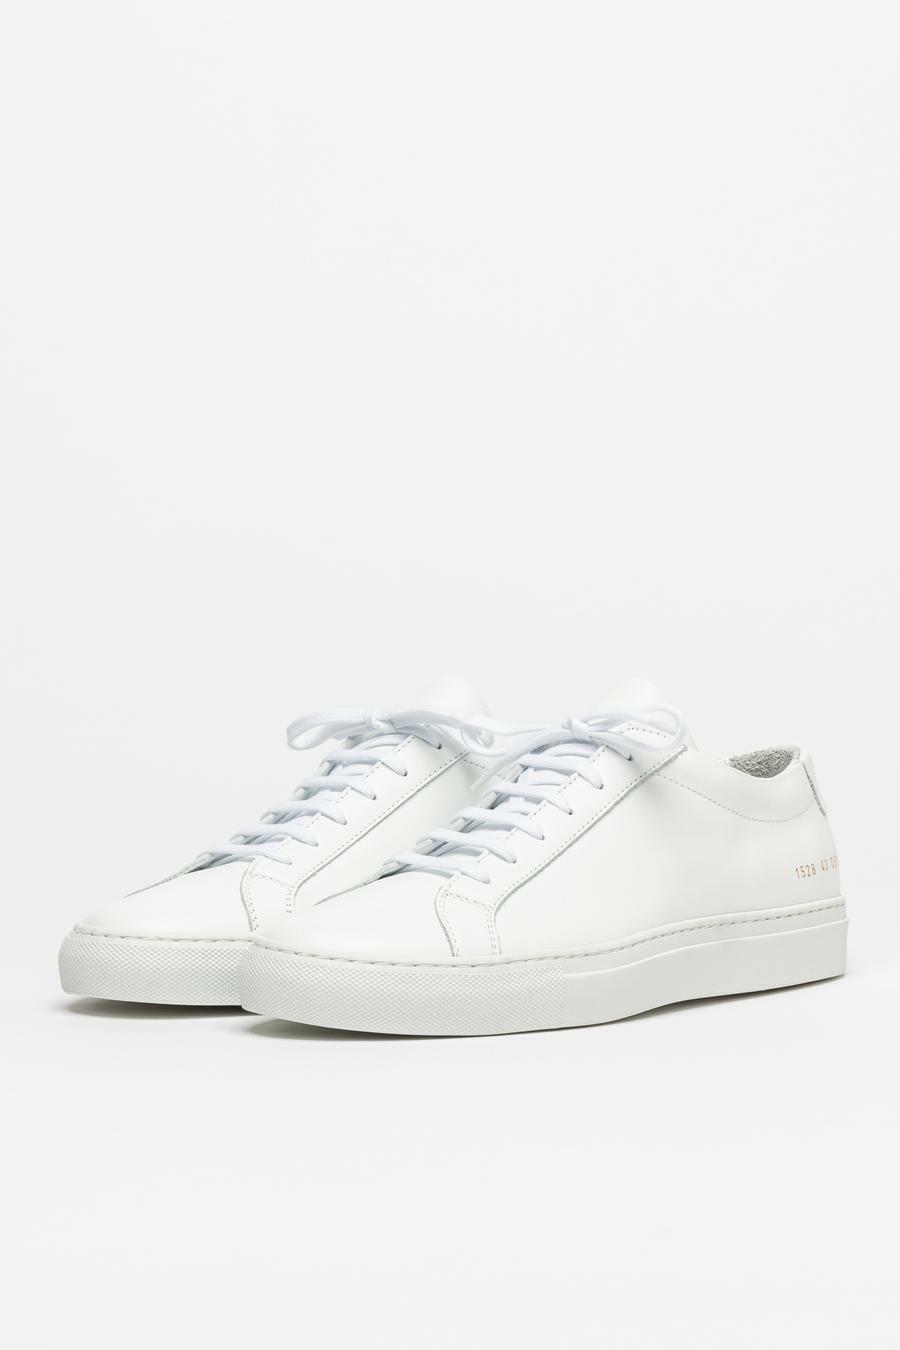 (Pre-Order) Common Projects Original Achilles Low - Whi